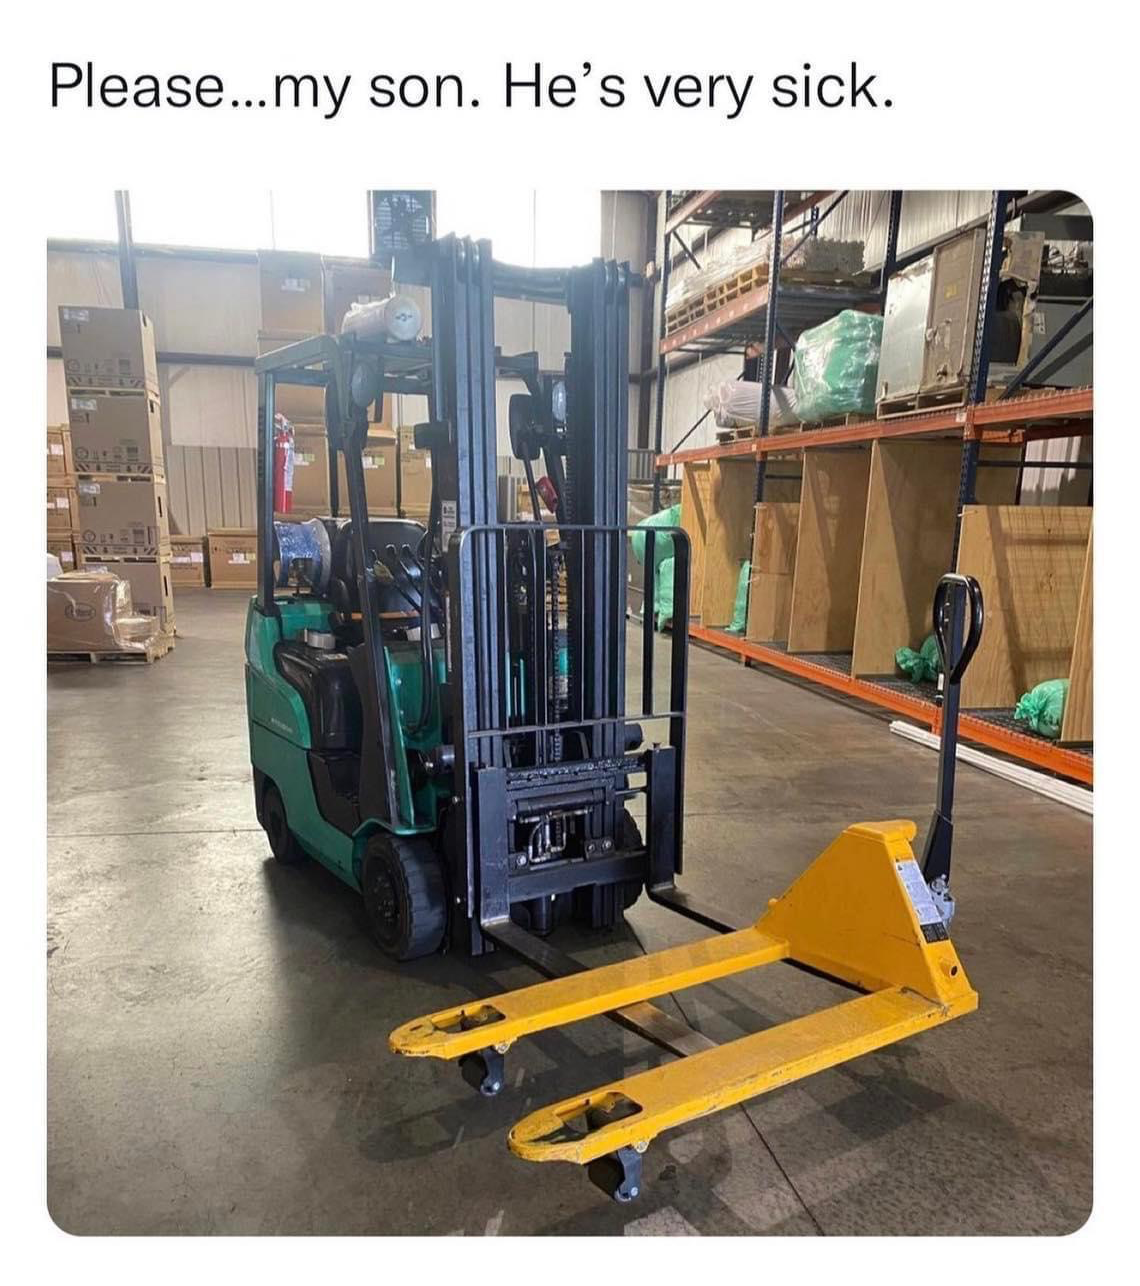 High Quality Fortklift son sick Blank Meme Template